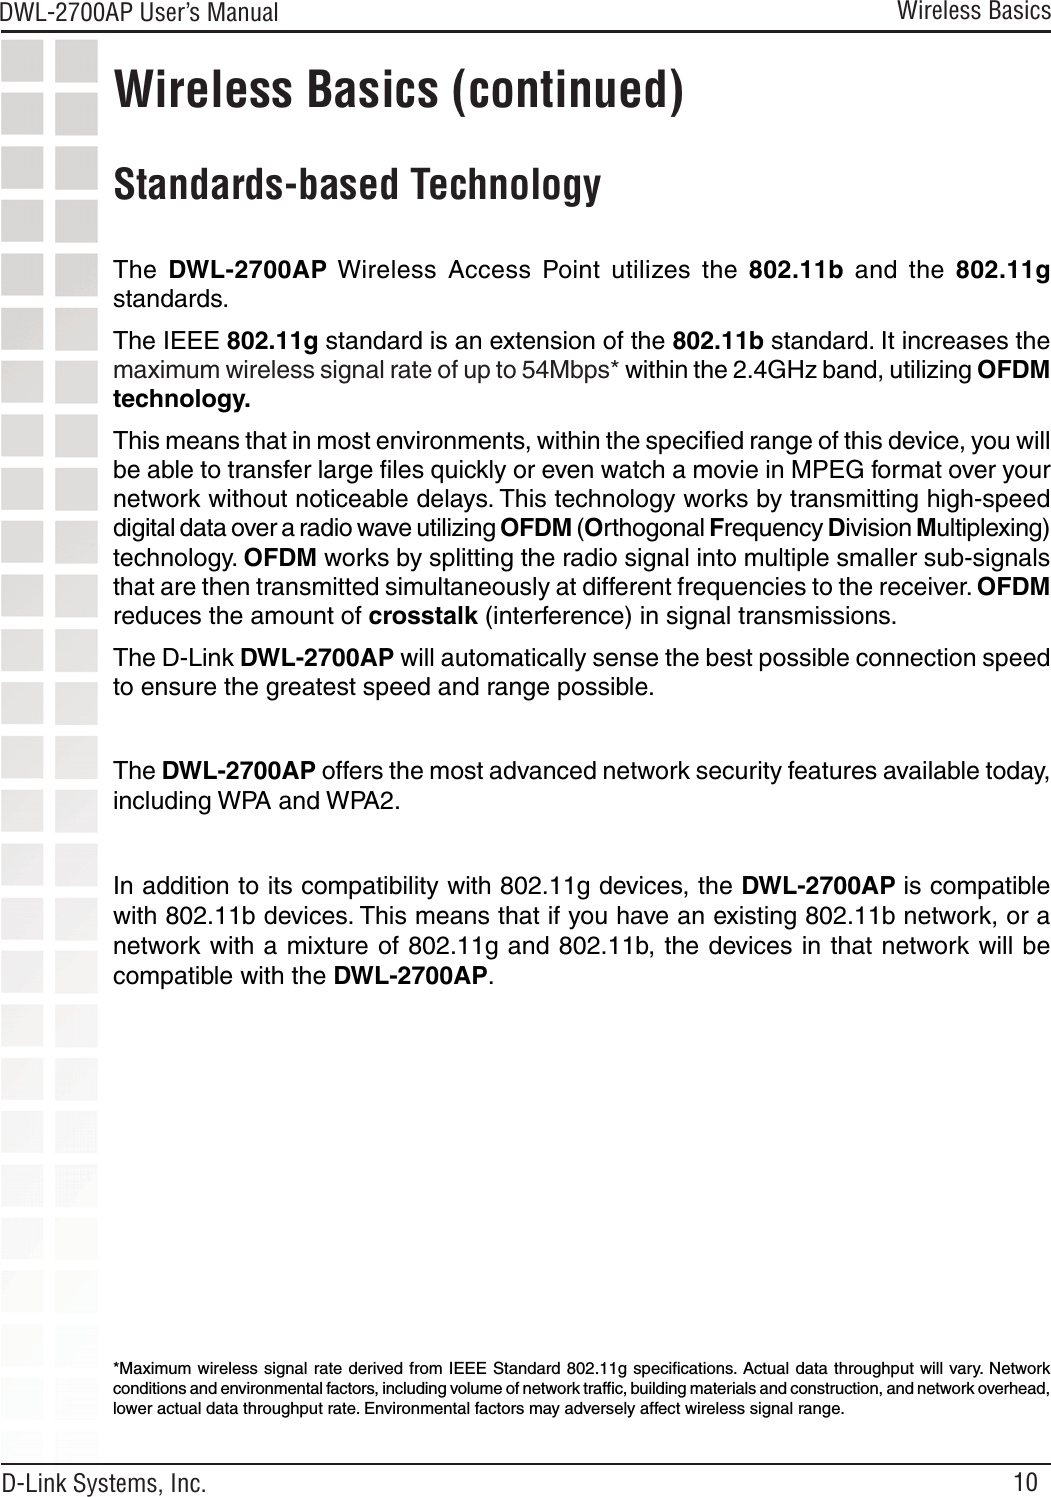 10DWL-2700AP User’s Manual D-Link Systems, Inc.Wireless Basics (continued) Standards-based TechnologyThe  DWL-2700AP Wireless  Access  Point  utilizes  the  802.11b  and  the  802.11g standards.The IEEE 802.11g standard is an extension of the 802.11b standard. It increases the maximum wireless signal rate of up to 54Mbps* within the 2.4GHz band, utilizing OFDM technology.This means that in most environments, within the speciﬁed range of this device, you will be able to transfer large ﬁles quickly or even watch a movie in MPEG format over your network without noticeable delays. This technology works by transmitting high-speed digital data over a radio wave utilizing OFDM (Orthogonal Frequency Division Multiplexing) technology. OFDM works by splitting the radio signal into multiple smaller sub-signals that are then transmitted simultaneously at different frequencies to the receiver. OFDM reduces the amount of crosstalk (interference) in signal transmissions. The D-Link DWL-2700AP will automatically sense the best possible connection speed to ensure the greatest speed and range possible.The DWL-2700AP offers the most advanced network security features available today, including WPA and WPA2.  In addition to its compatibility with 802.11g devices, the DWL-2700AP is compatible with 802.11b devices. This means that if you have an existing 802.11b network, or a network with a mixture of 802.11g and 802.11b, the devices in that network will be compatible with the DWL-2700AP.*Maximum wireless signal rate derived from  IEEE Standard 802.11g speciﬁcations.  Actual data throughput will vary. Network conditions and environmental factors, including volume of network trafﬁc, building materials and construction, and network overhead, lower actual data throughput rate. Environmental factors may adversely affect wireless signal range.Wireless Basics